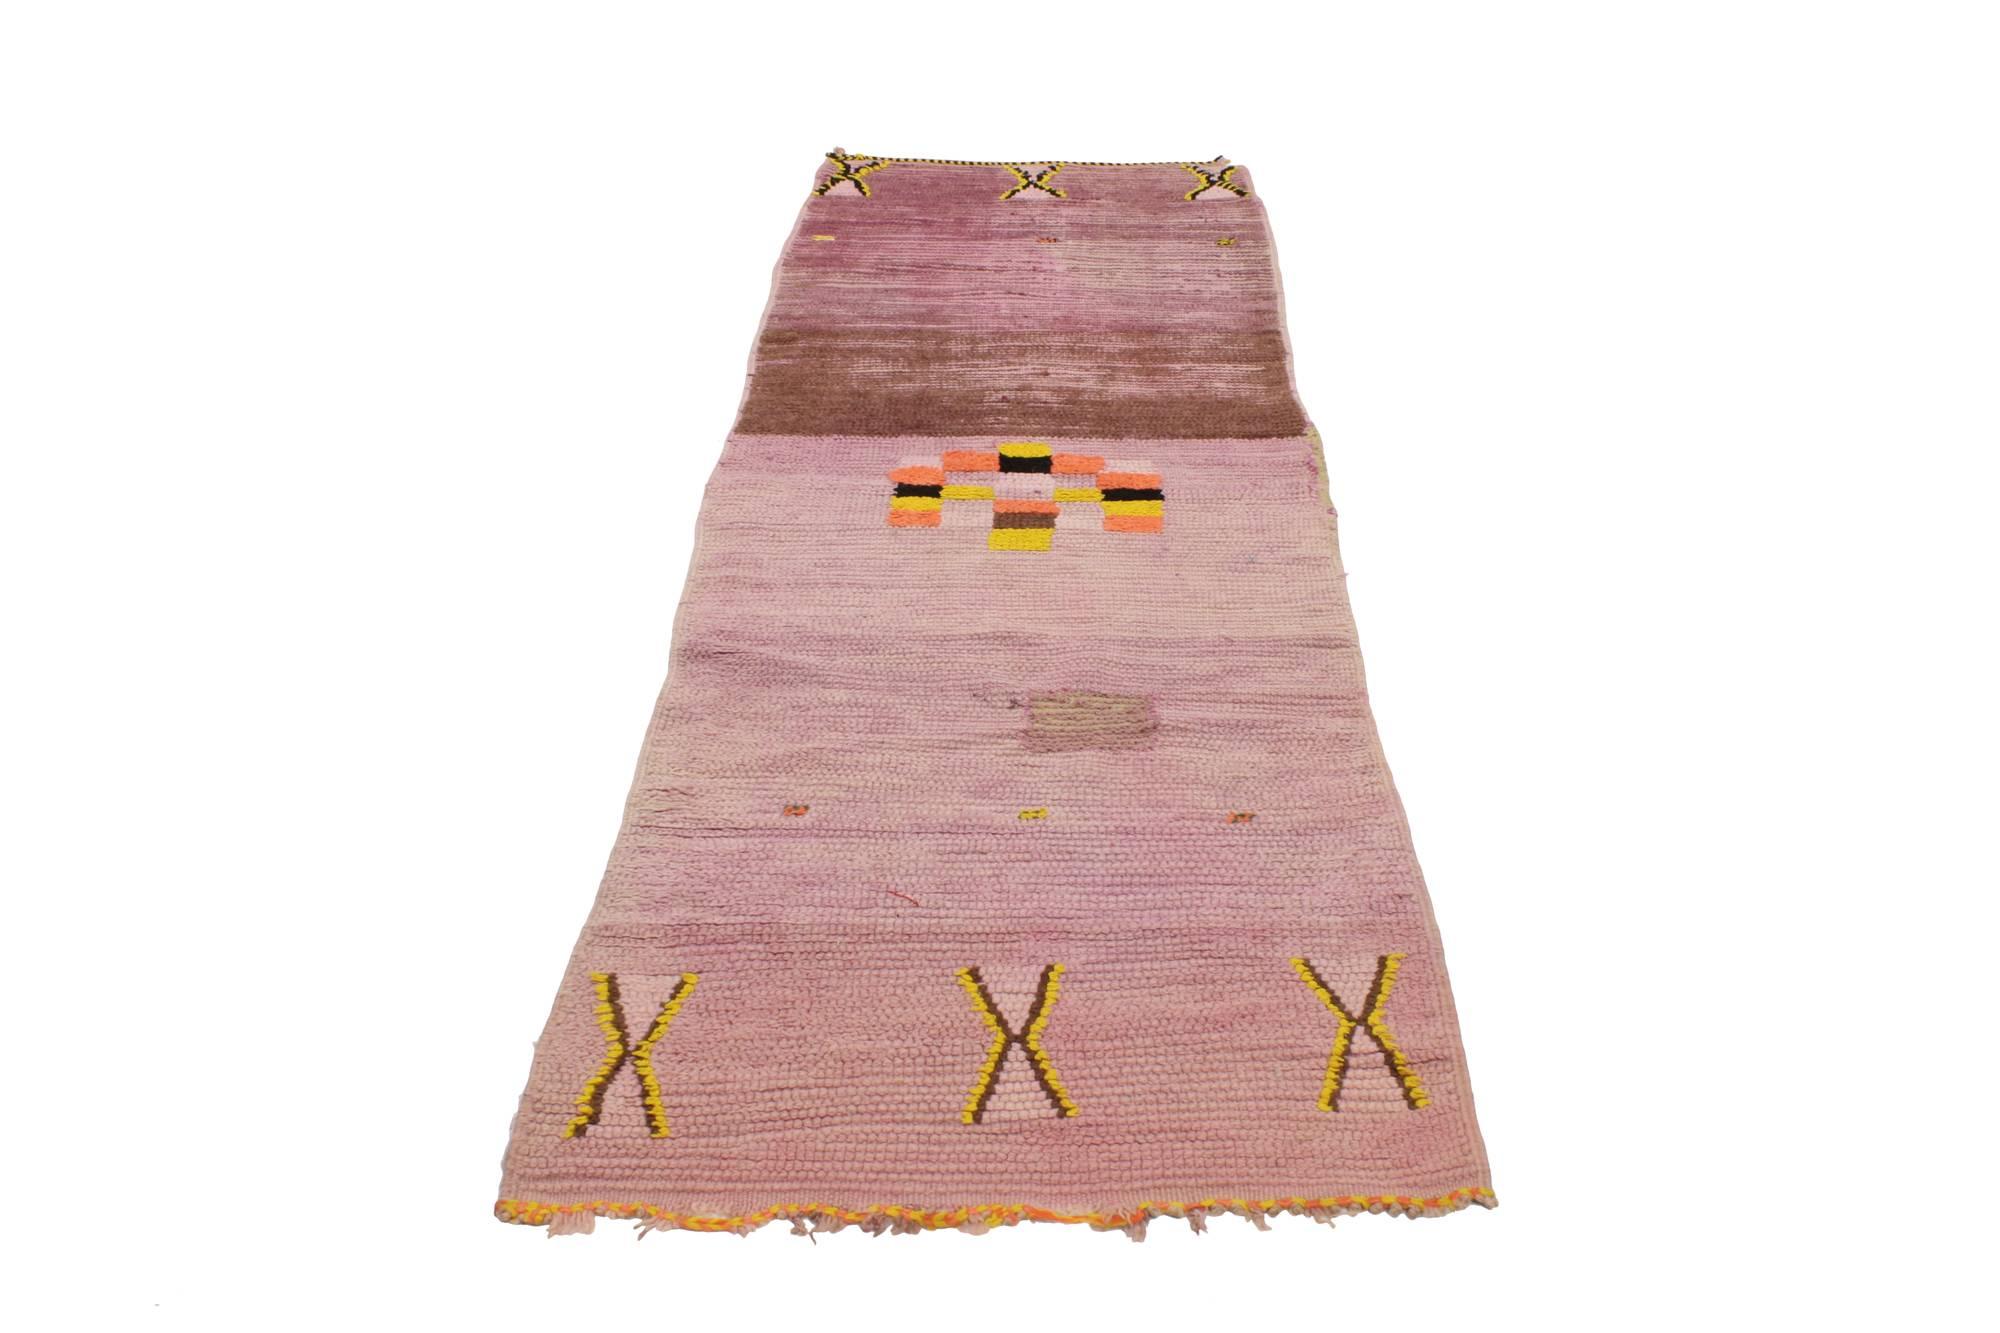 20482, vintage Berber Moroccan runner. Conjure the tribal feeling of Moroccan spirit in this Vintage Berber Moroccan runner. Beautiful shades of primrose and pink are woven into this piece, working together to create a truly vibrant and life-giving